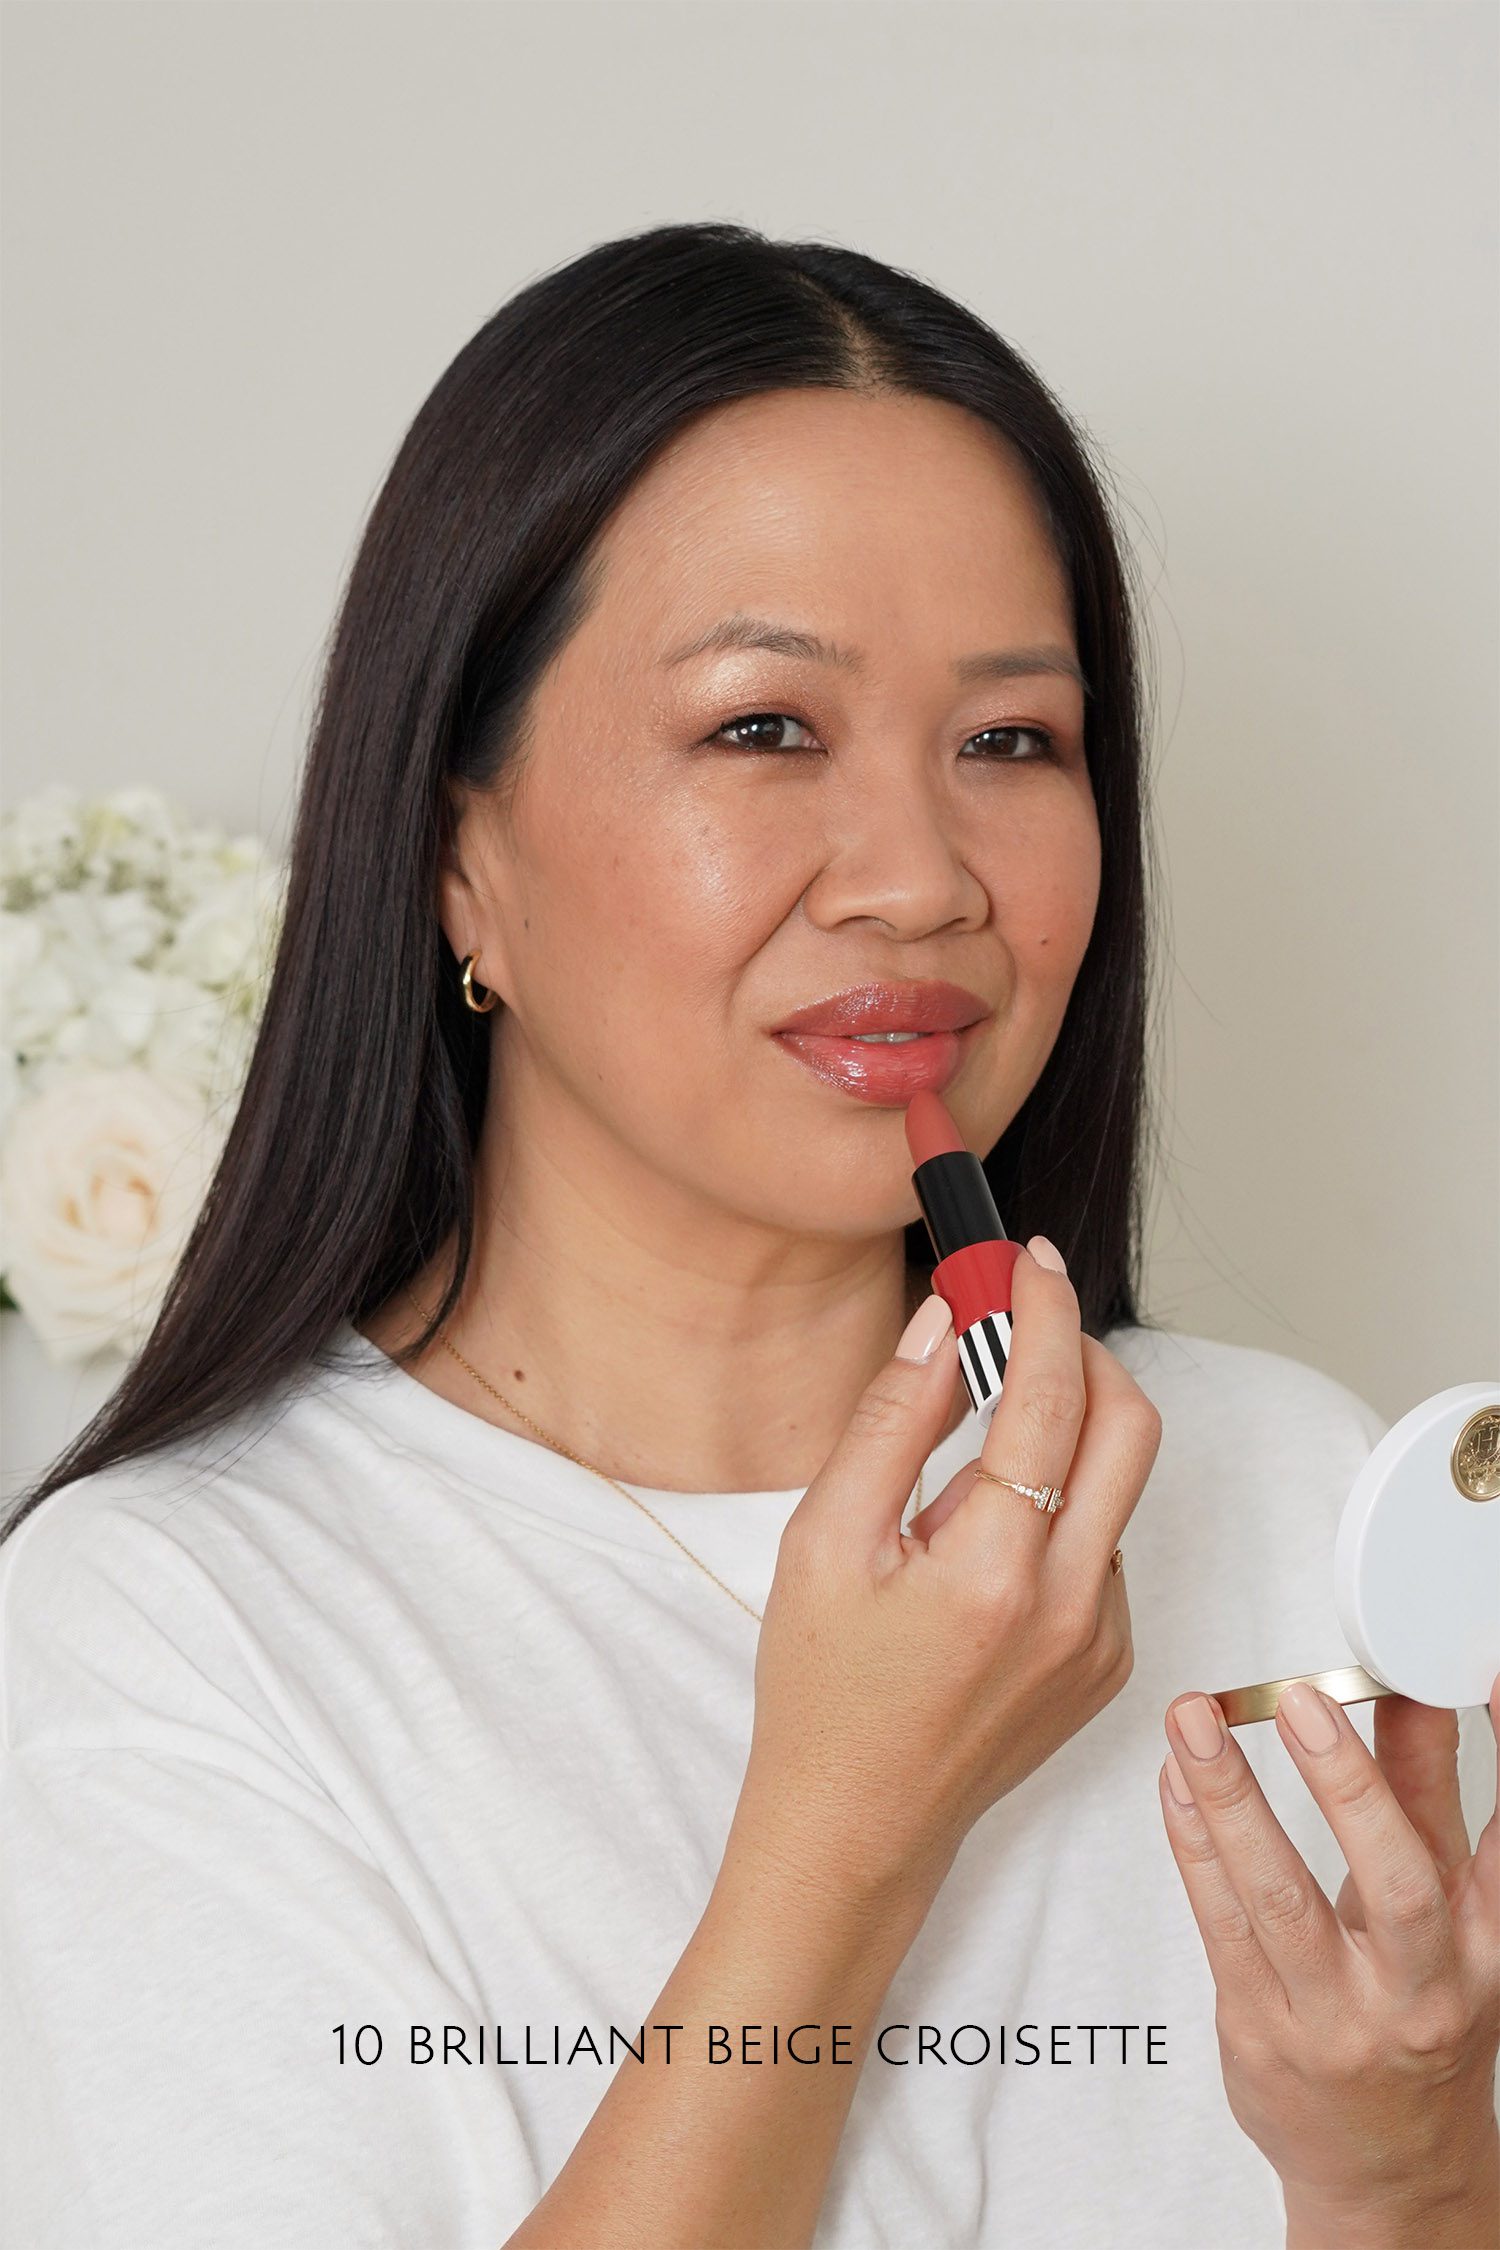 What are the Rouge Hermes lipsticks like?